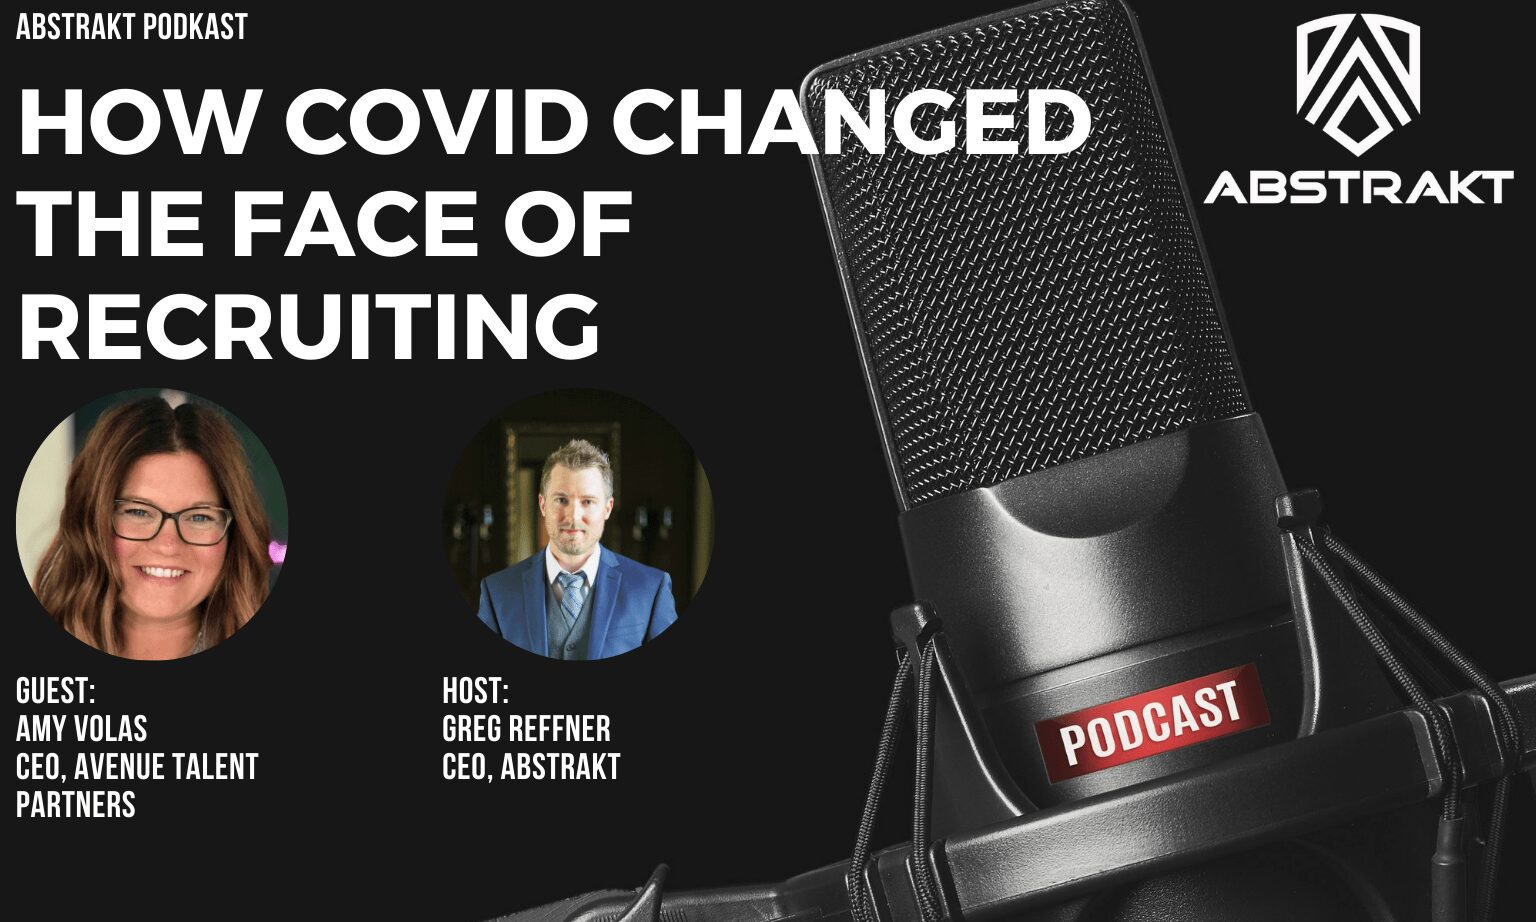 Has COVID Changed the Landscape of Sales Recruiting?